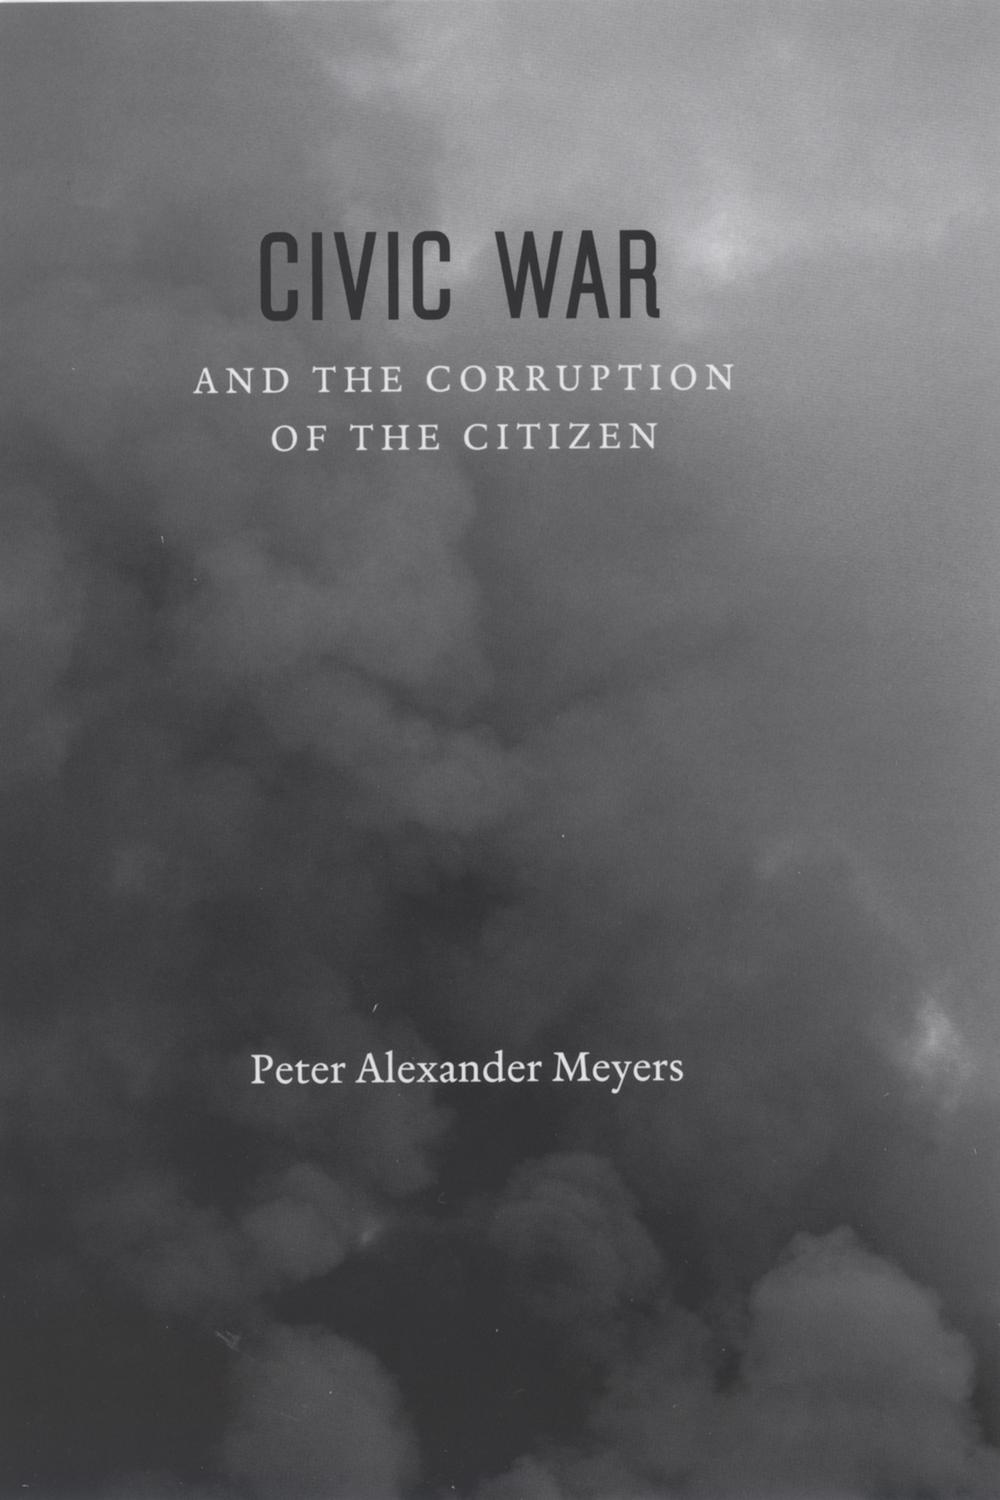 Civic War and the Corruption of the Citizen - Peter Alexander Meyers